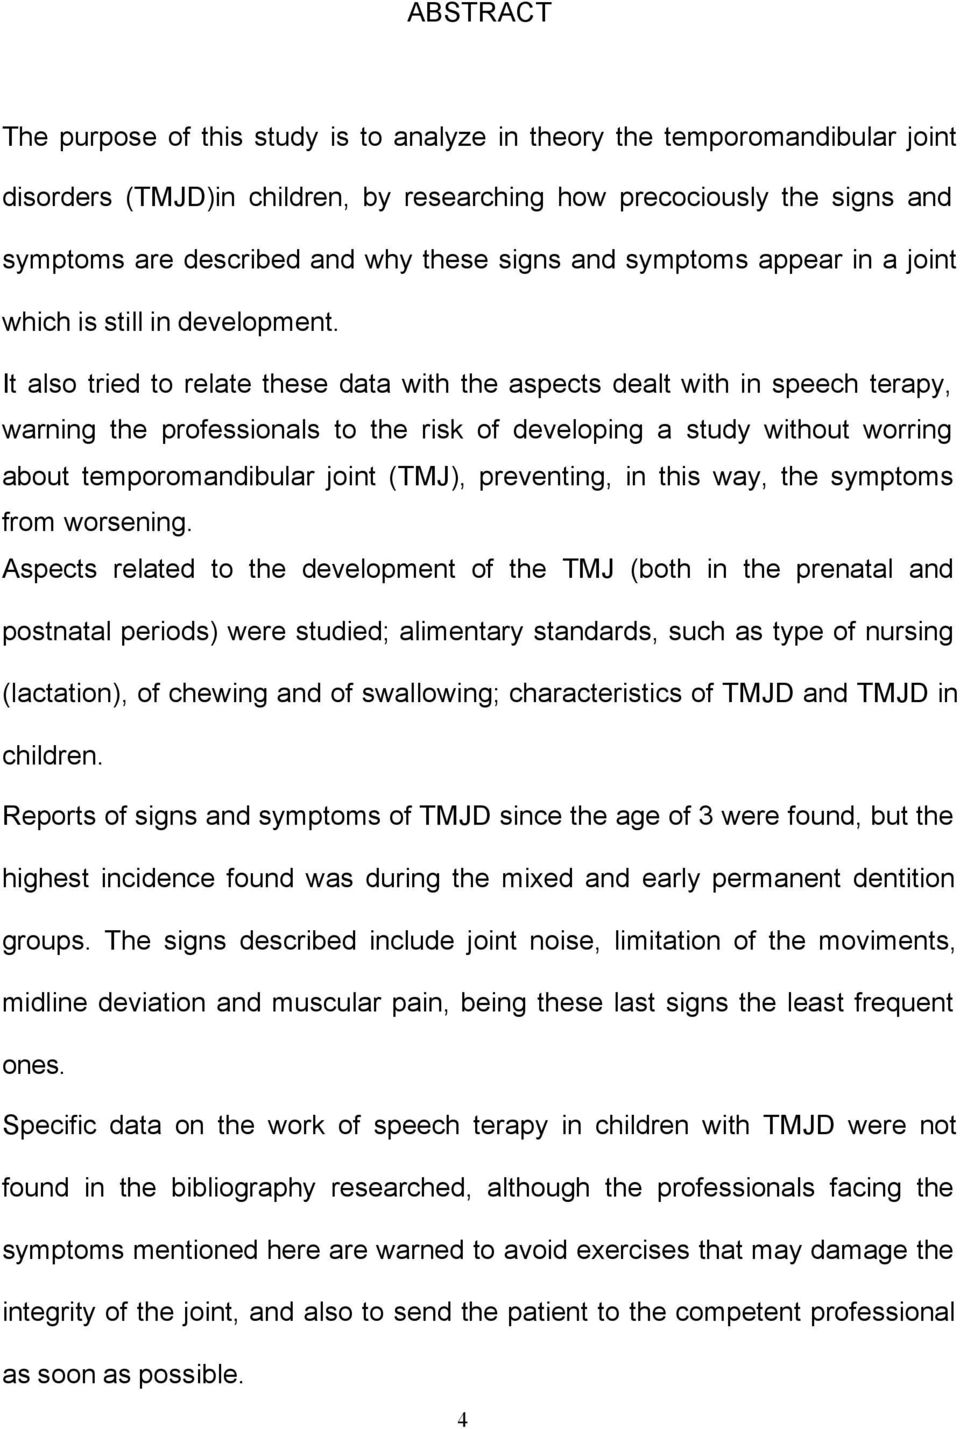 It also tried to relate these data with the aspects dealt with in speech terapy, warning the professionals to the risk of developing a study without worring about temporomandibular joint (TMJ),